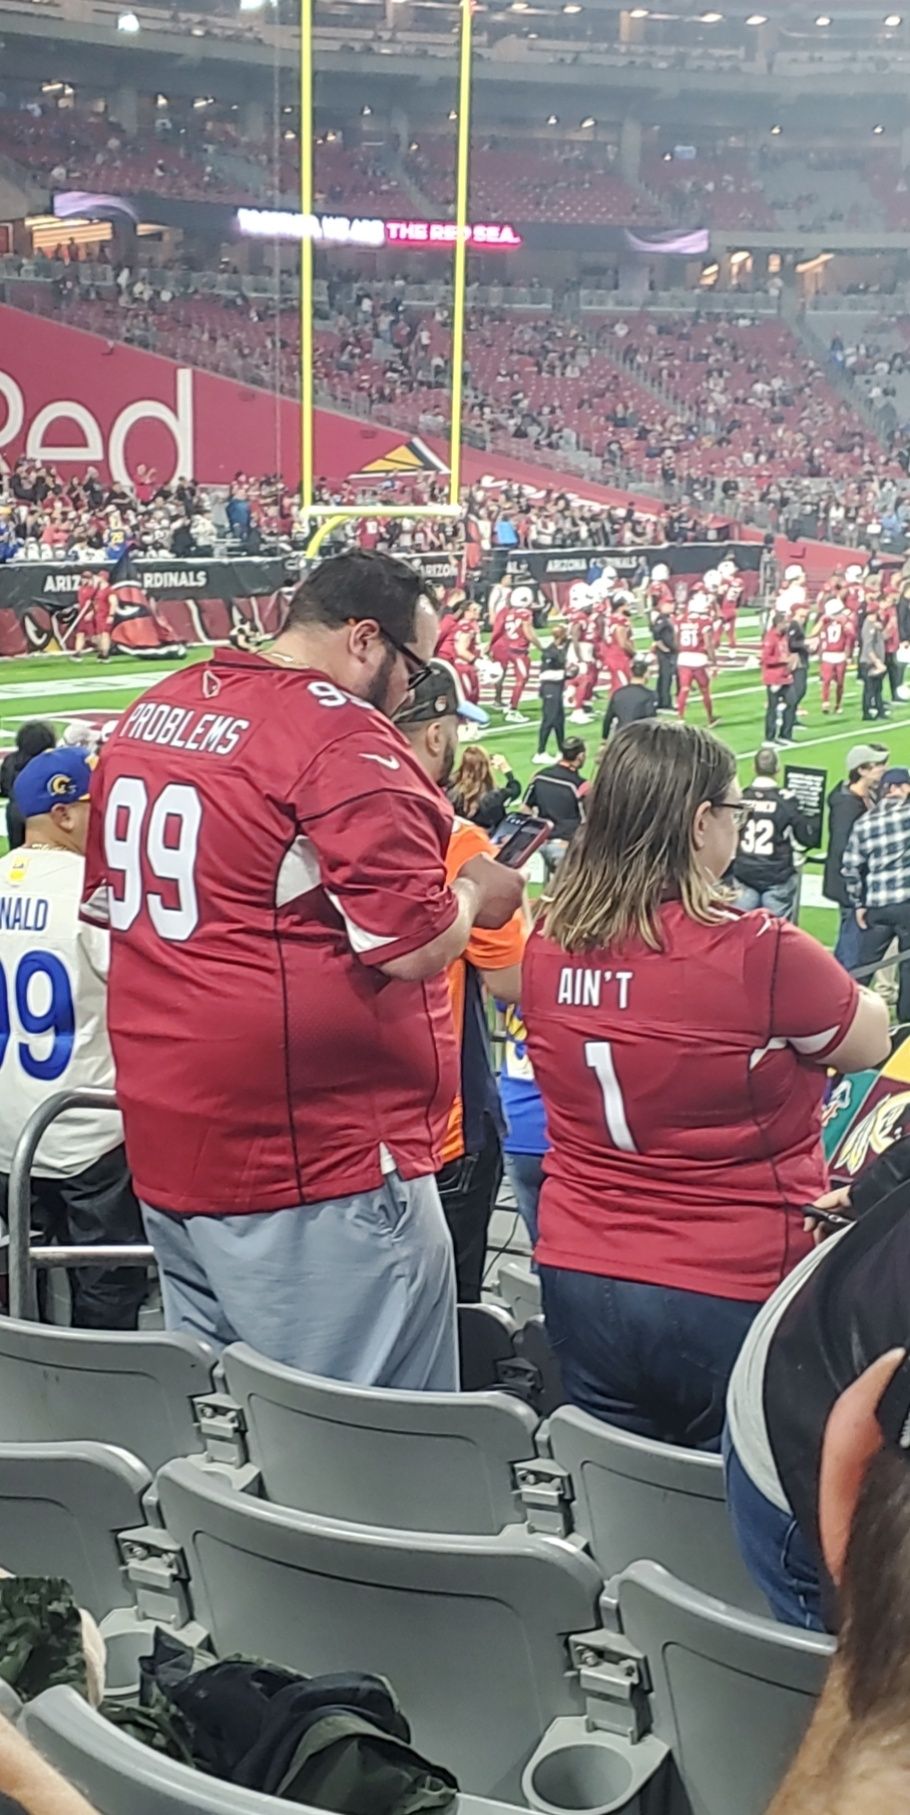 Saw this at the Cards game tonight...#relationshipgoals